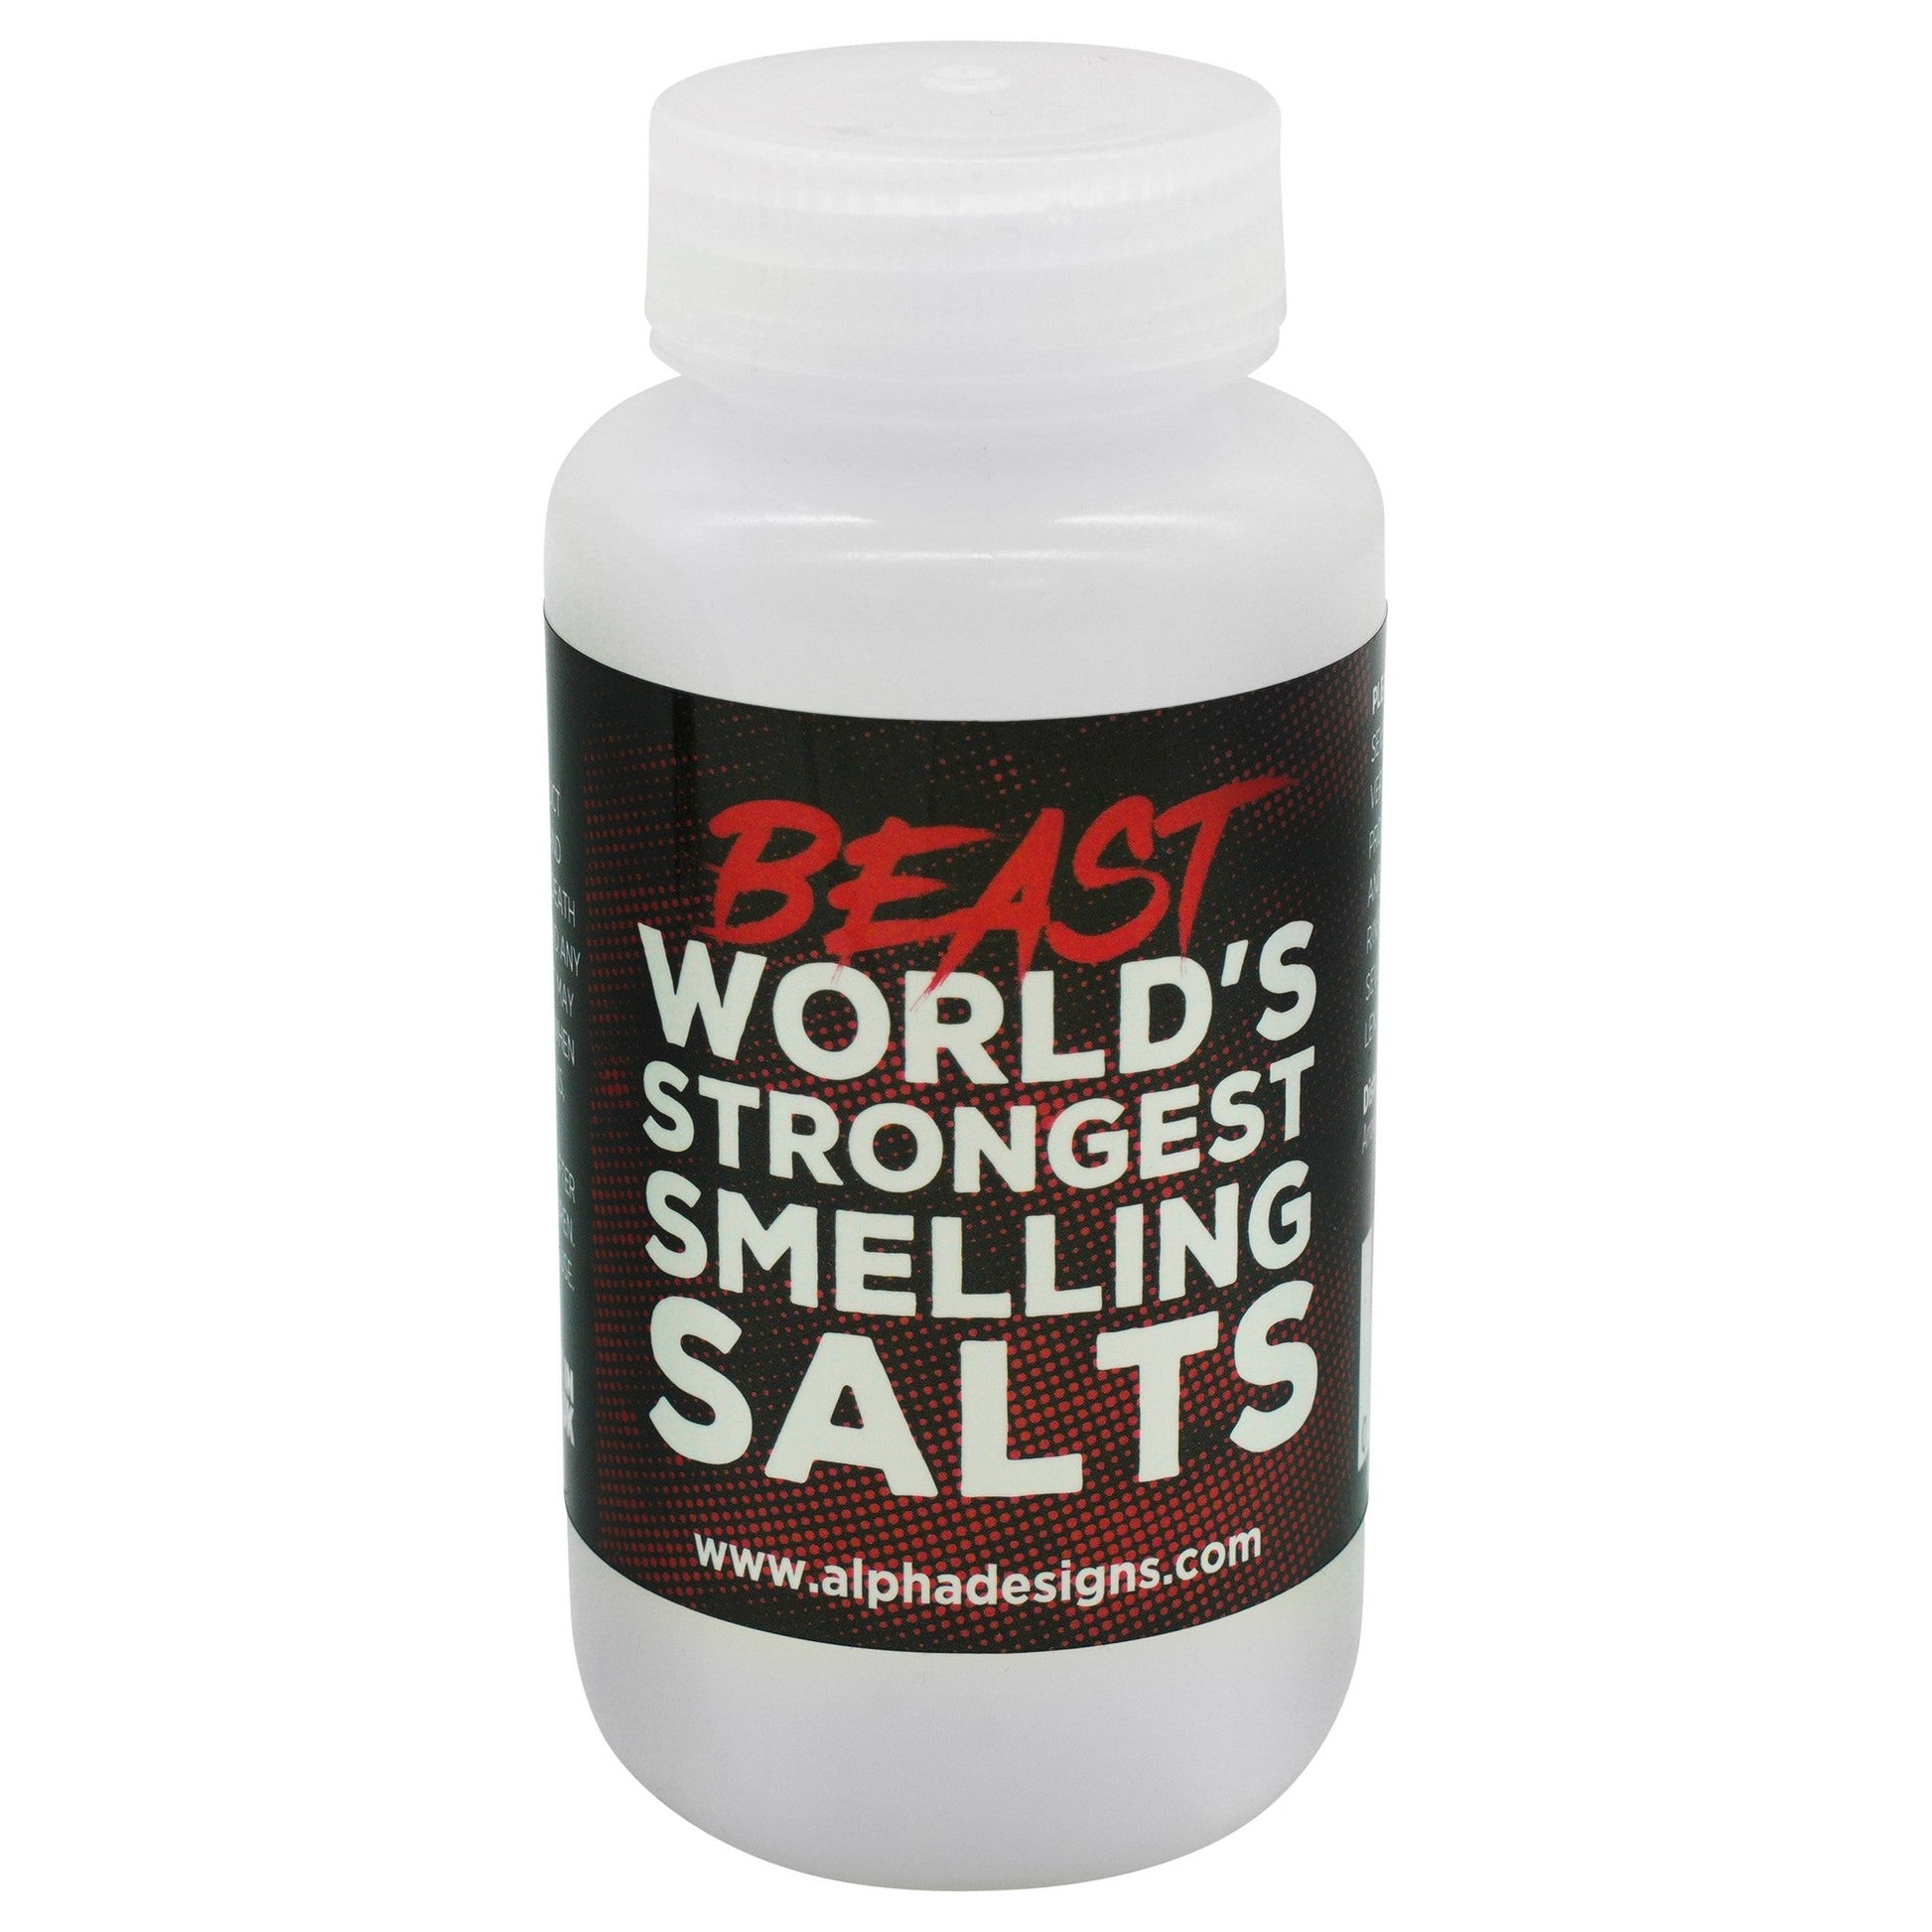 The Truth About Smelling Salts 